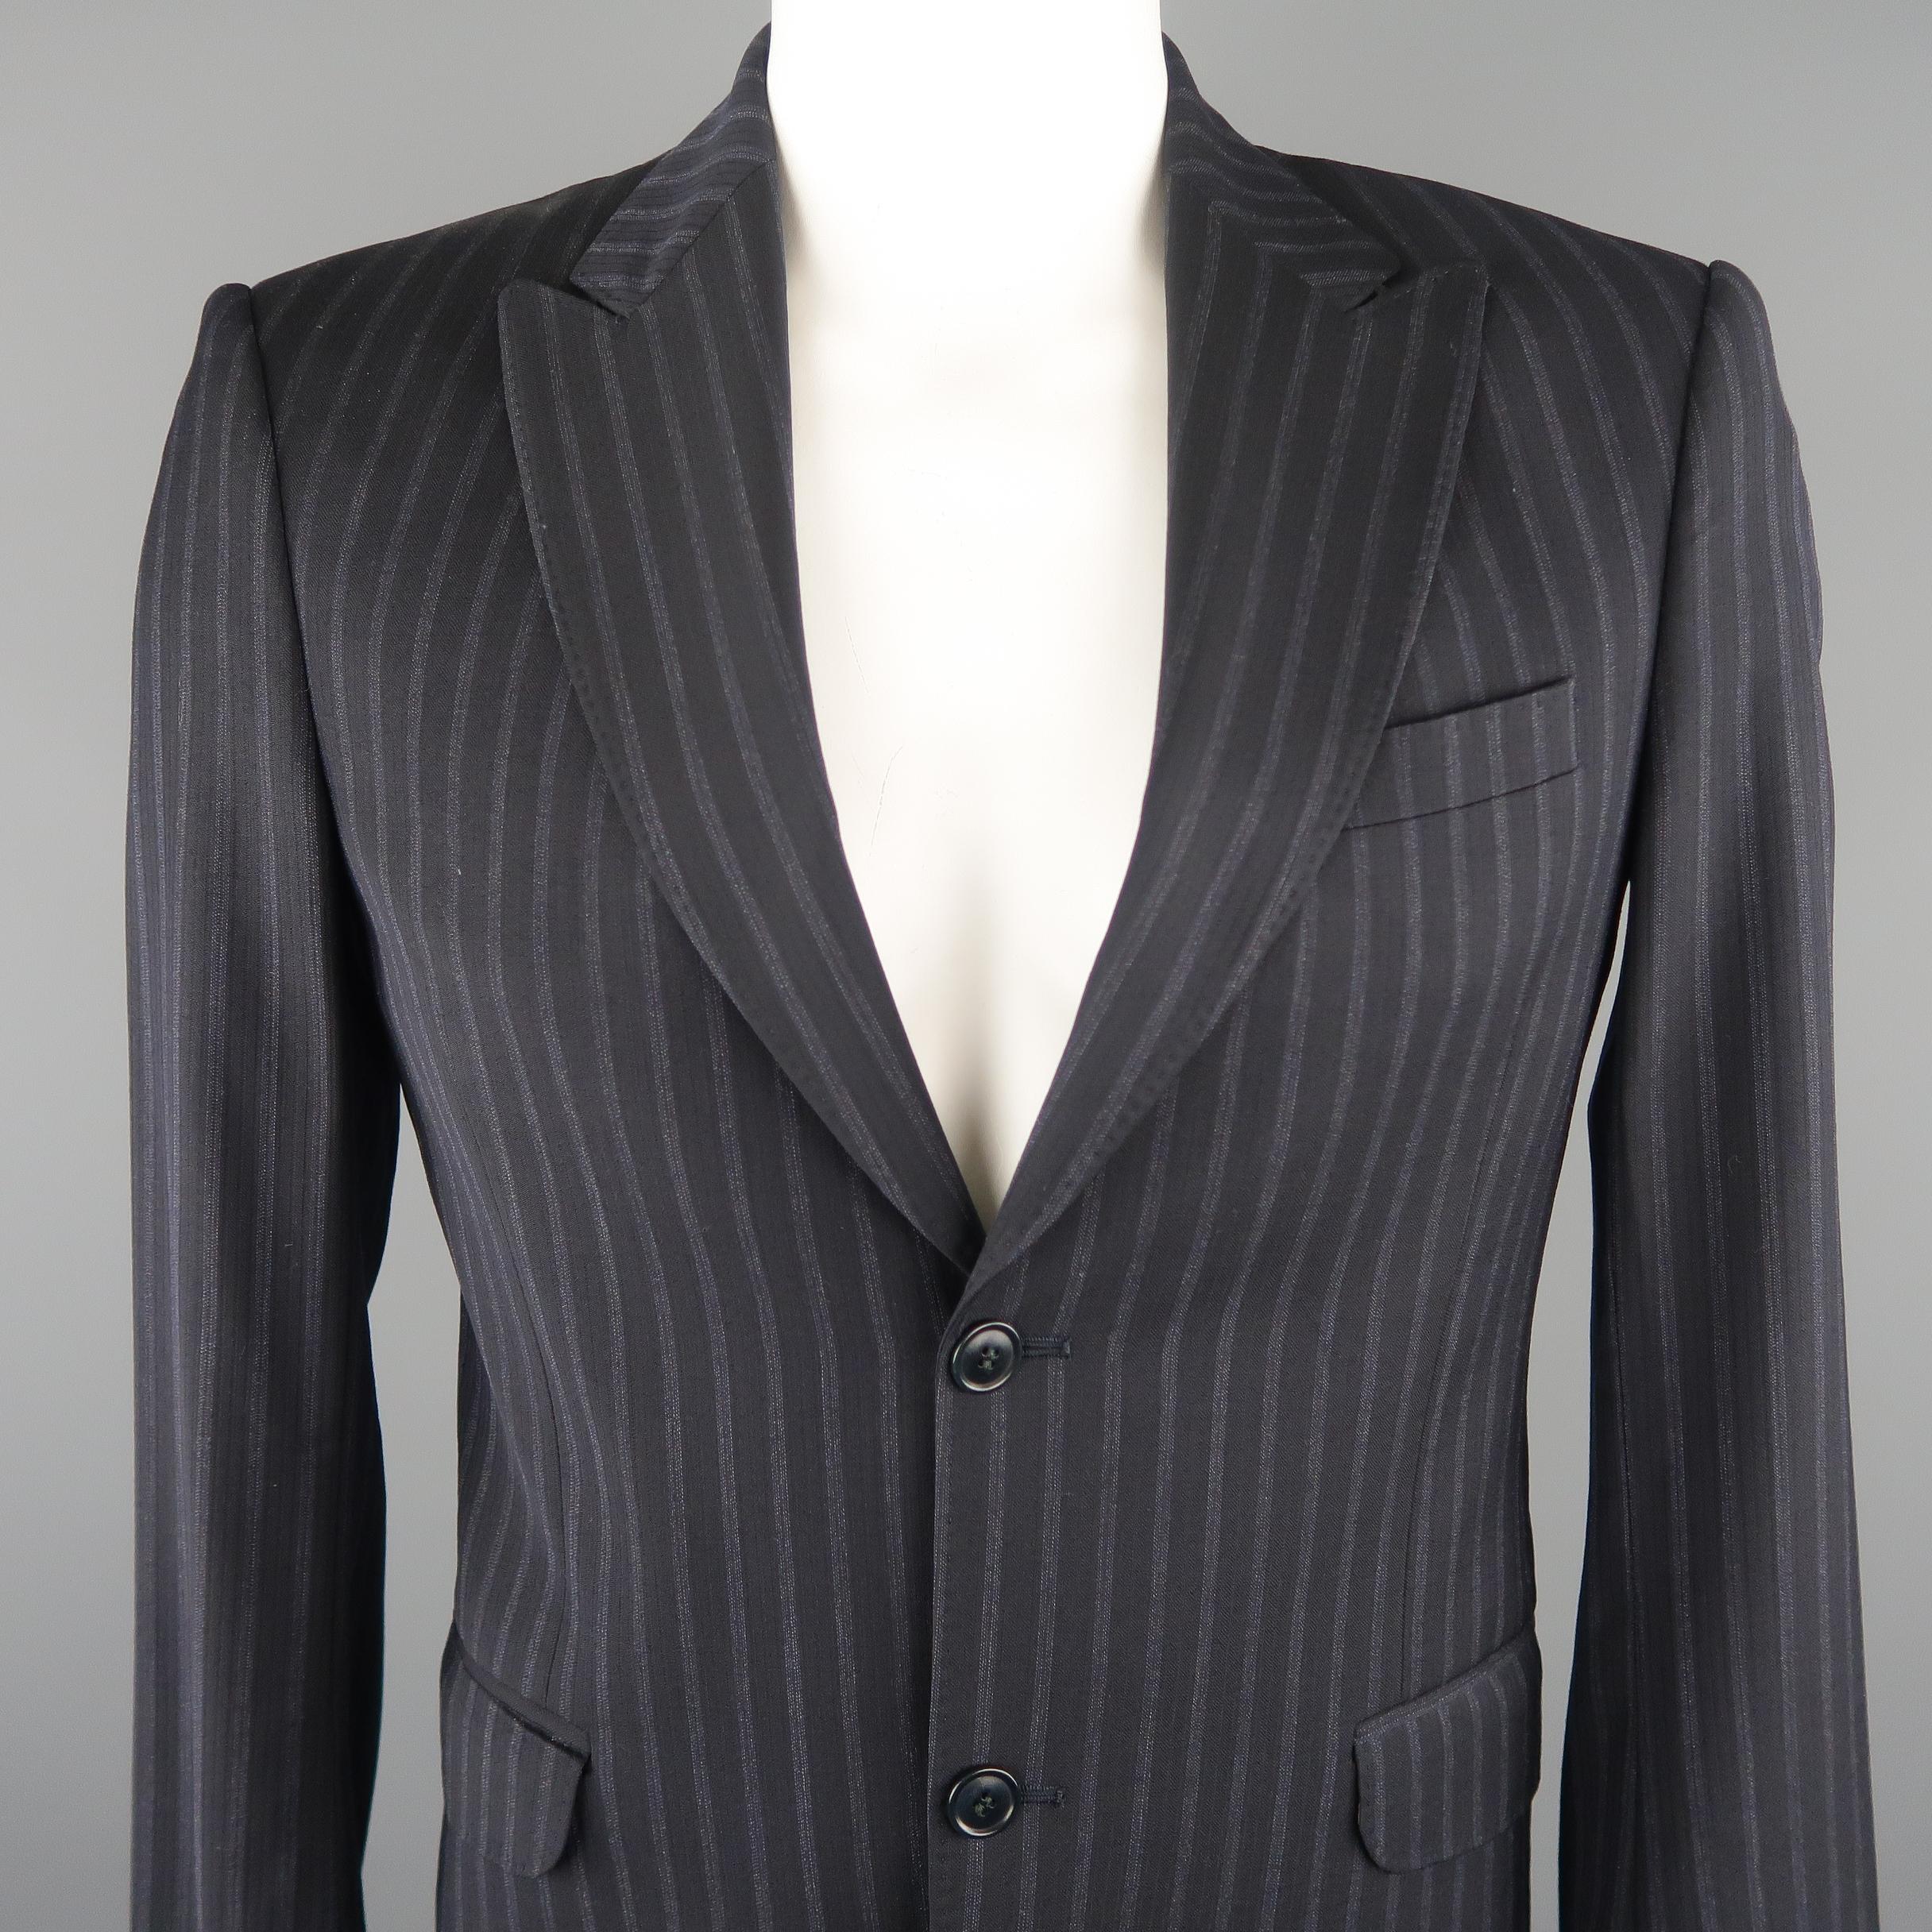 KENZO blazer comes in a black tone in a striped wool material, featuring a peak  lapel, slit and flap pockets, 2 buttons closure, single breasted and a slim fit. Made in France.
 
Excellent Pre-Owned Condition.
Marked: 48
 
Measurements:
 
Shoulder: